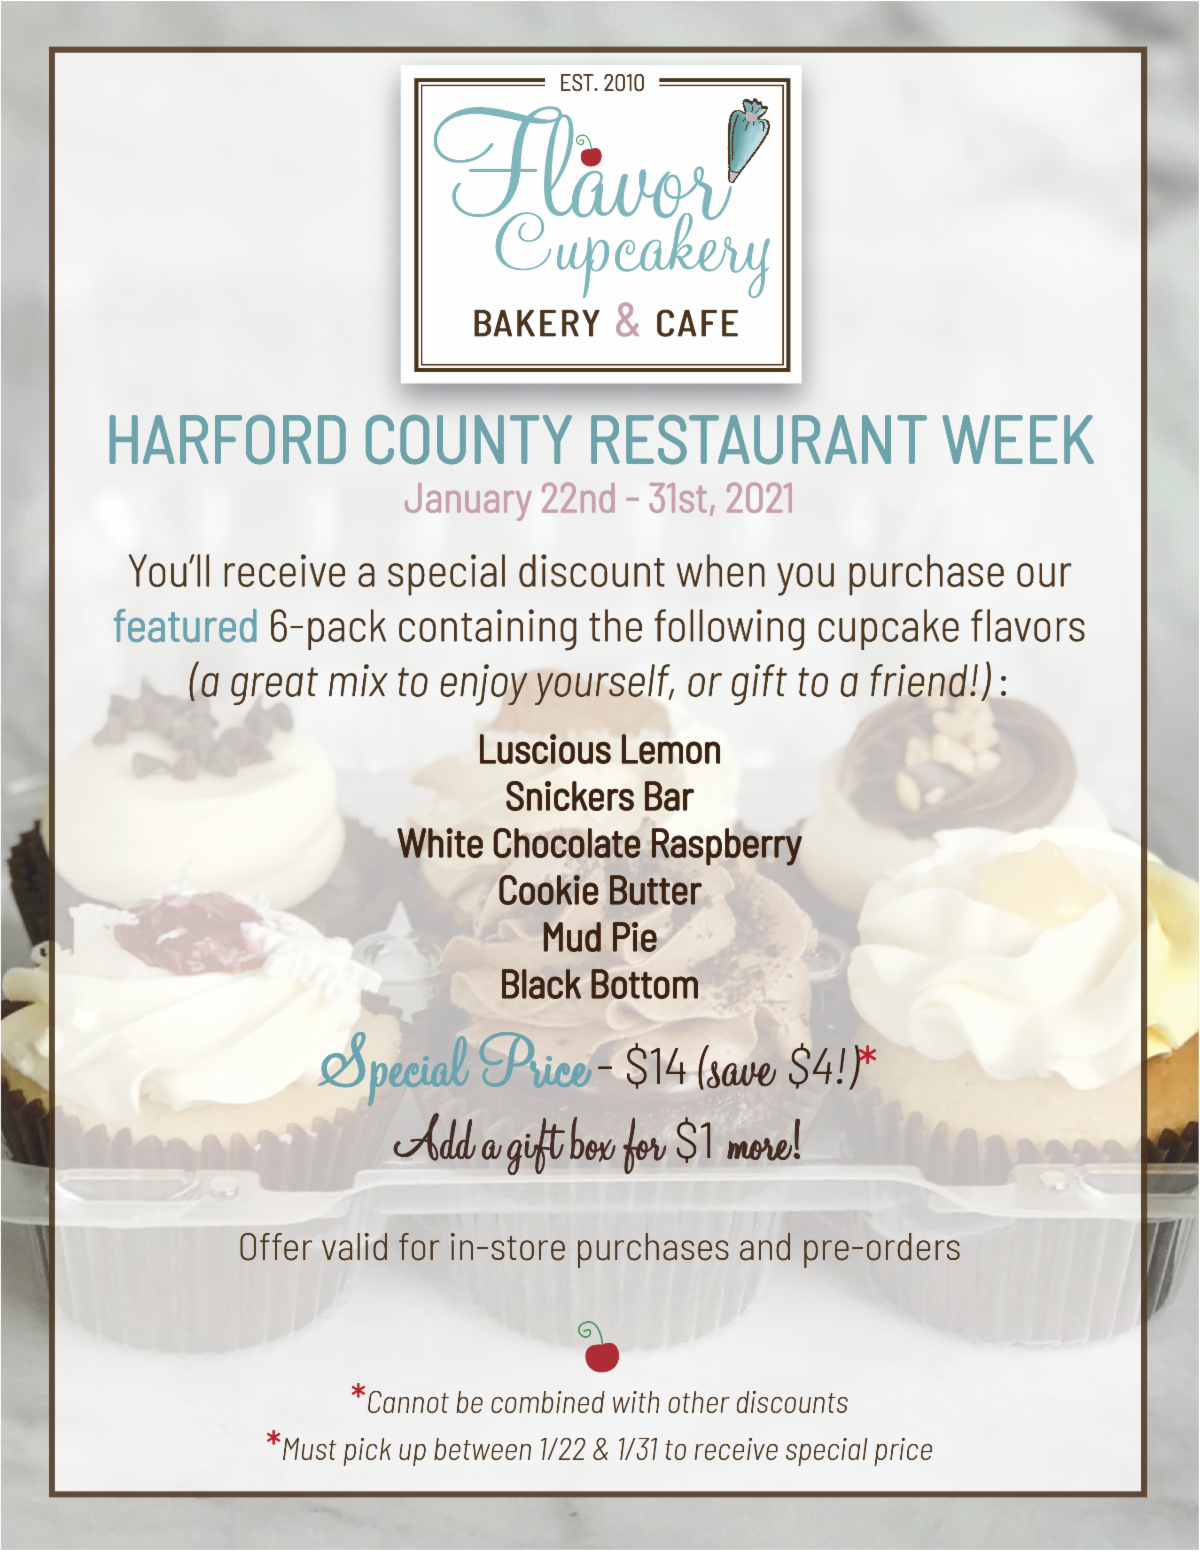 Special Offer for Harford County Restaurant Week